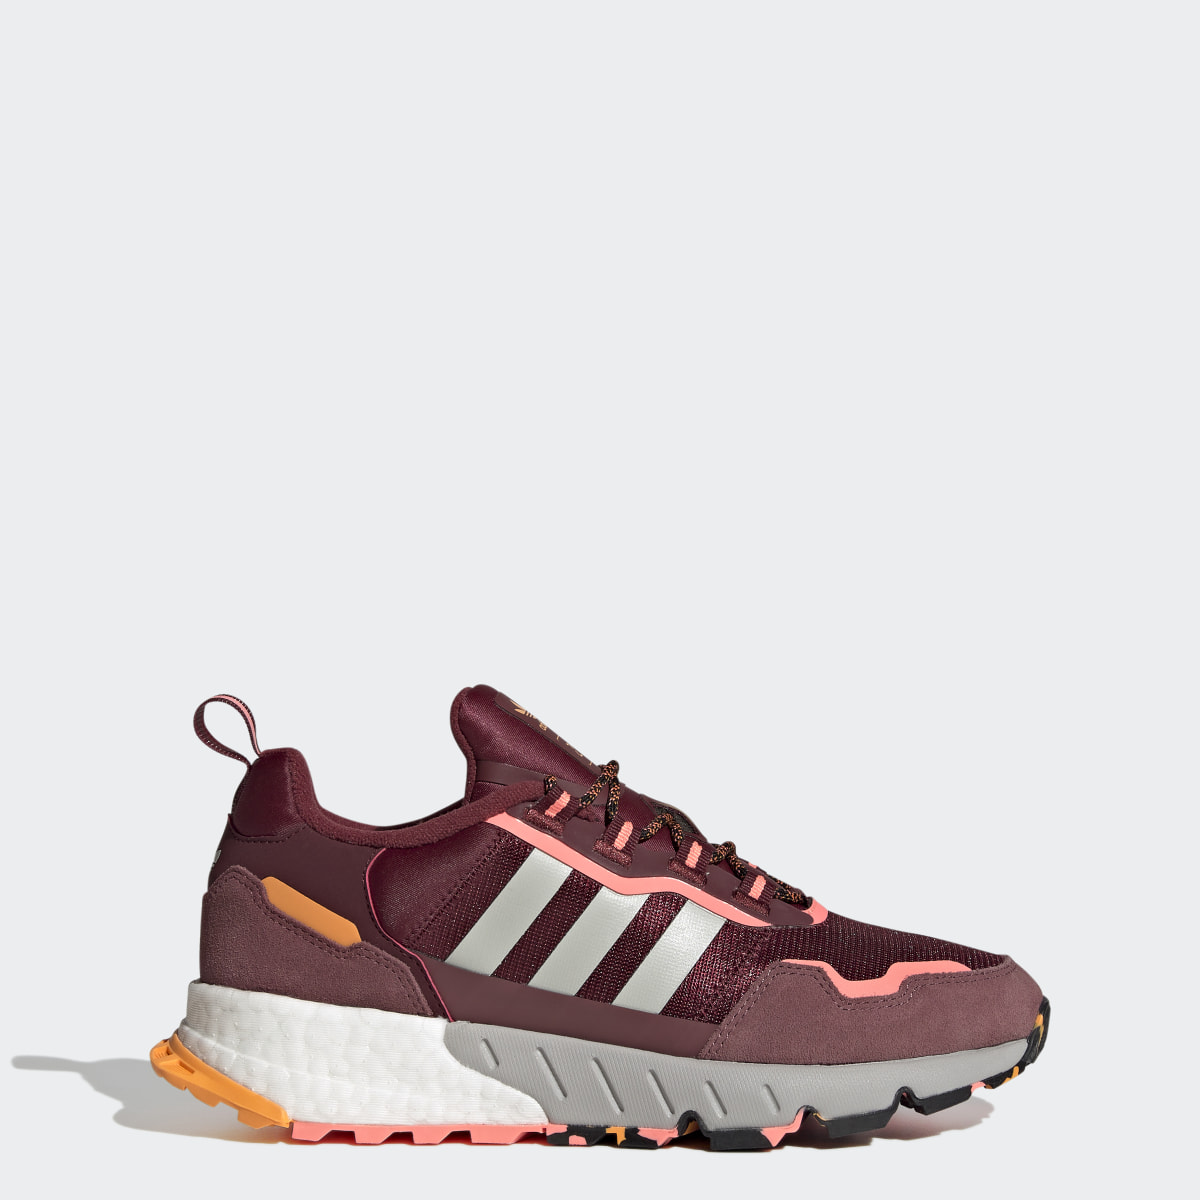 Adidas ZX 1K BOOST Shoes - GV8025